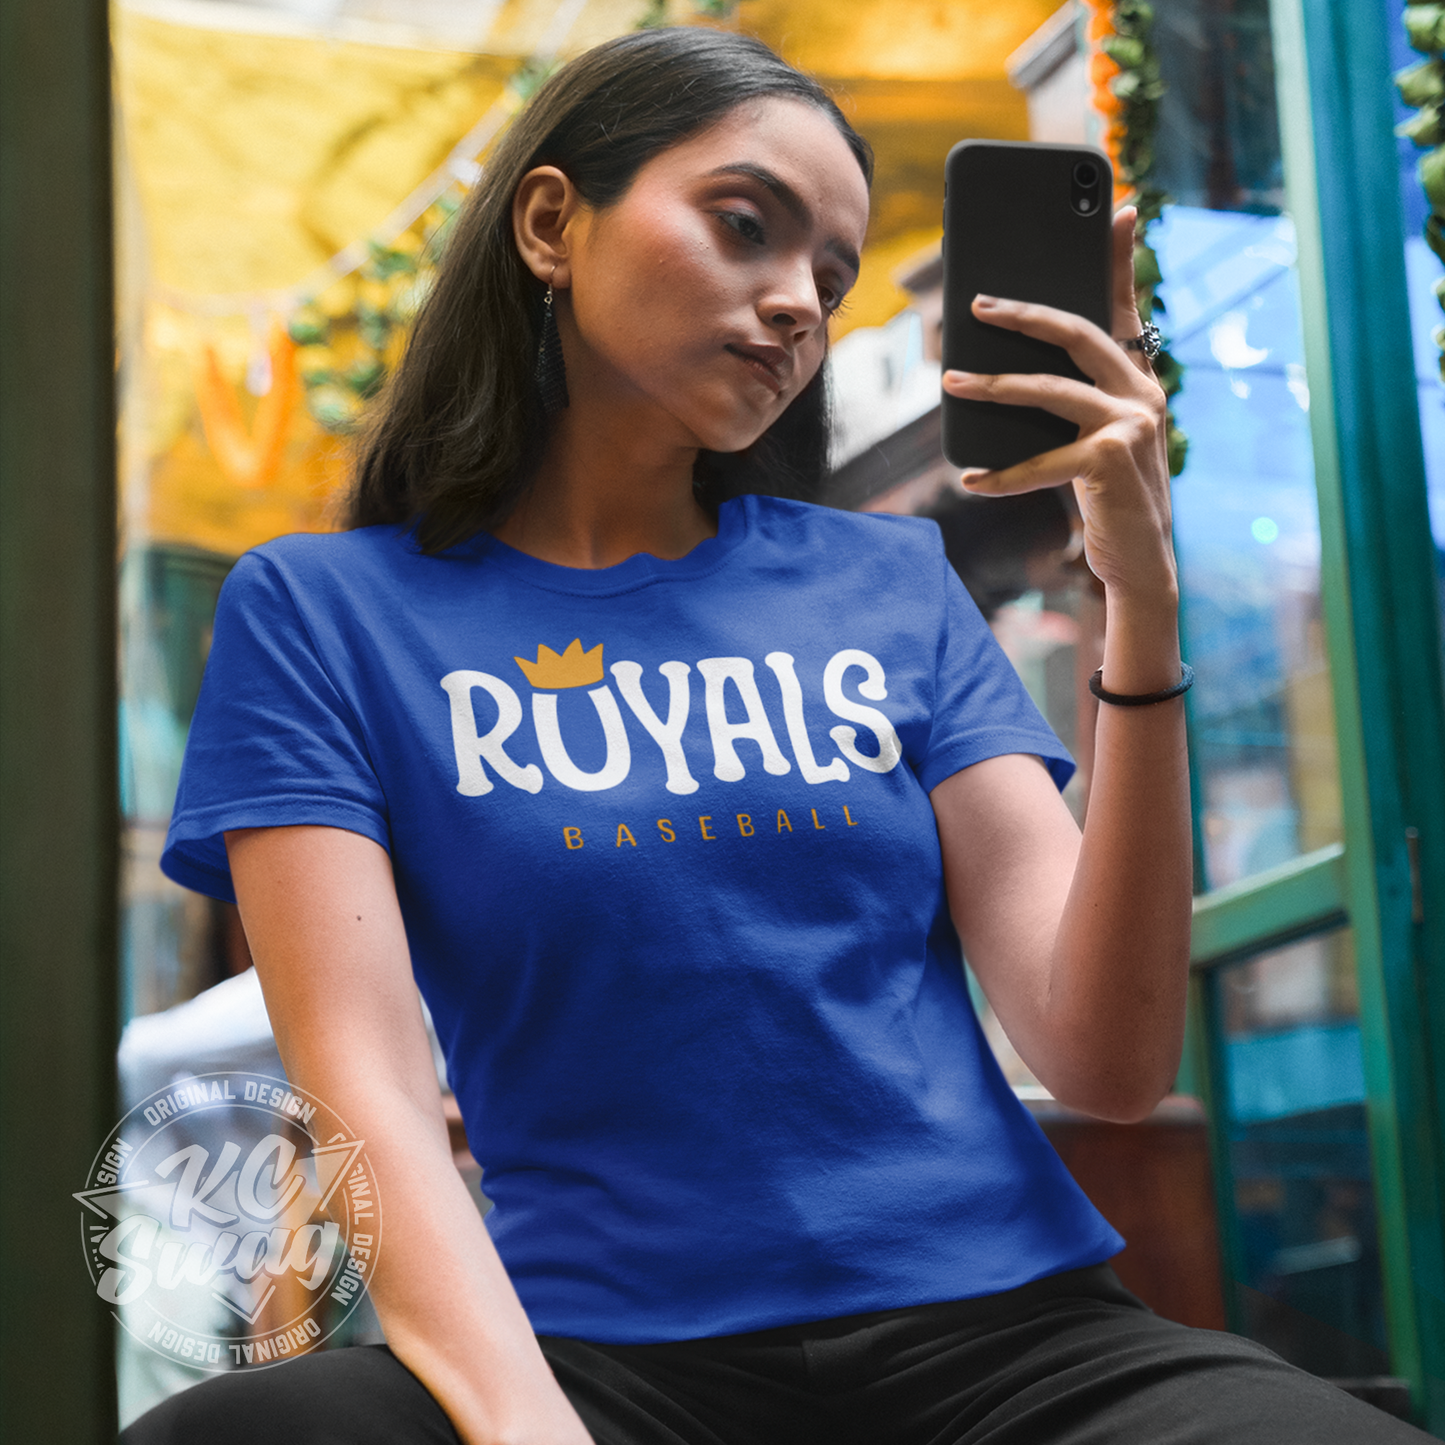 KC Swag - Kansas City Royals, Royals O-Crown design on royal blue unisex t-shirt worn by female model taking a mirror selfie in front of color draped fabrics